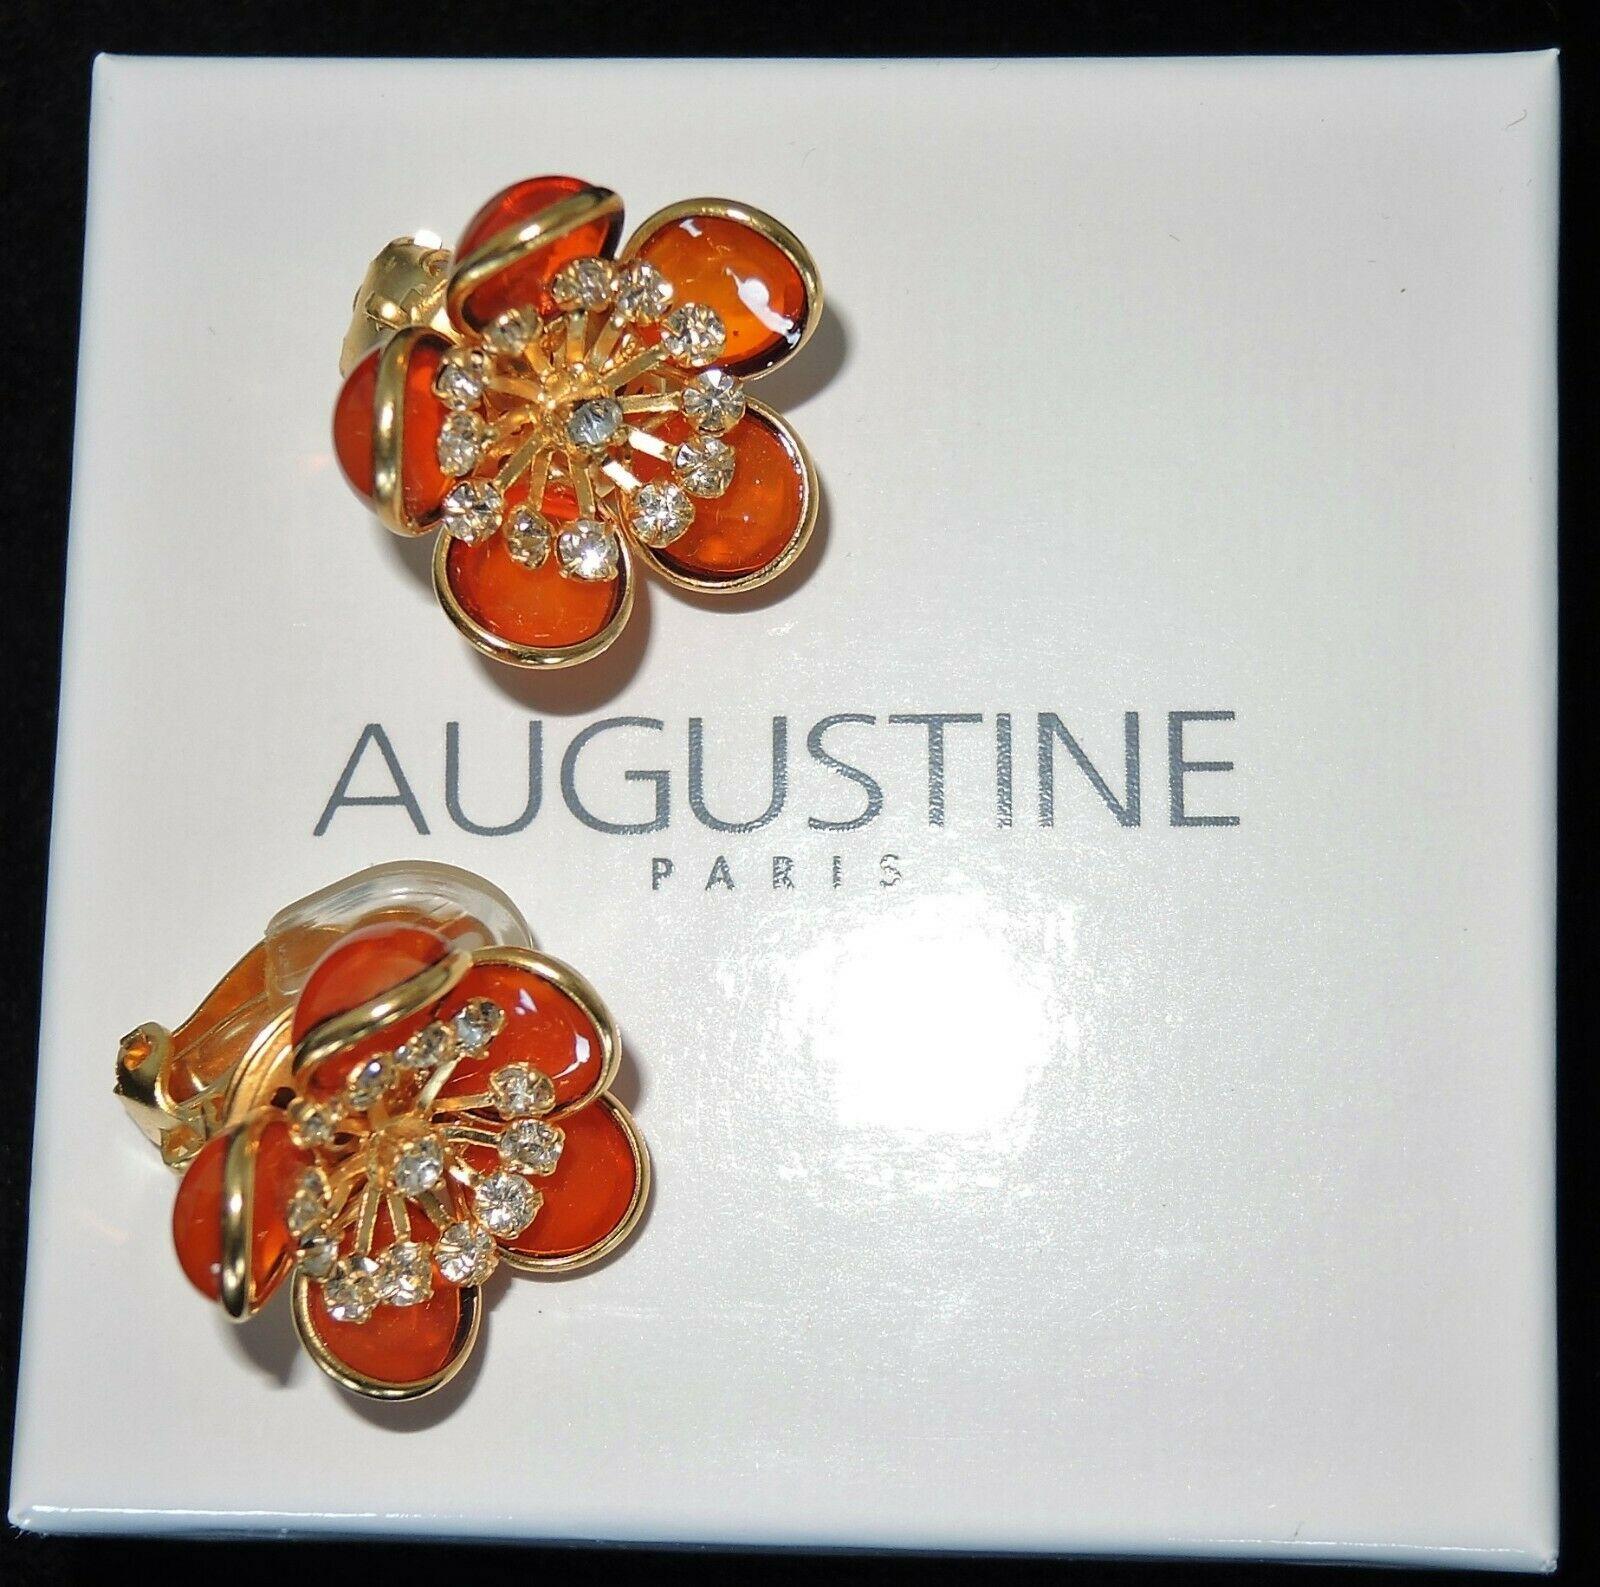 Simply Fabulous Clip on Flower Earrings designed by AUGUSTINE Paris and produced by Thierry Gripoix. Featuring Gripoix glass Flower petals in orange (milky, not translucent); center of each flower prong set with small clear Crystals. Gold-plated